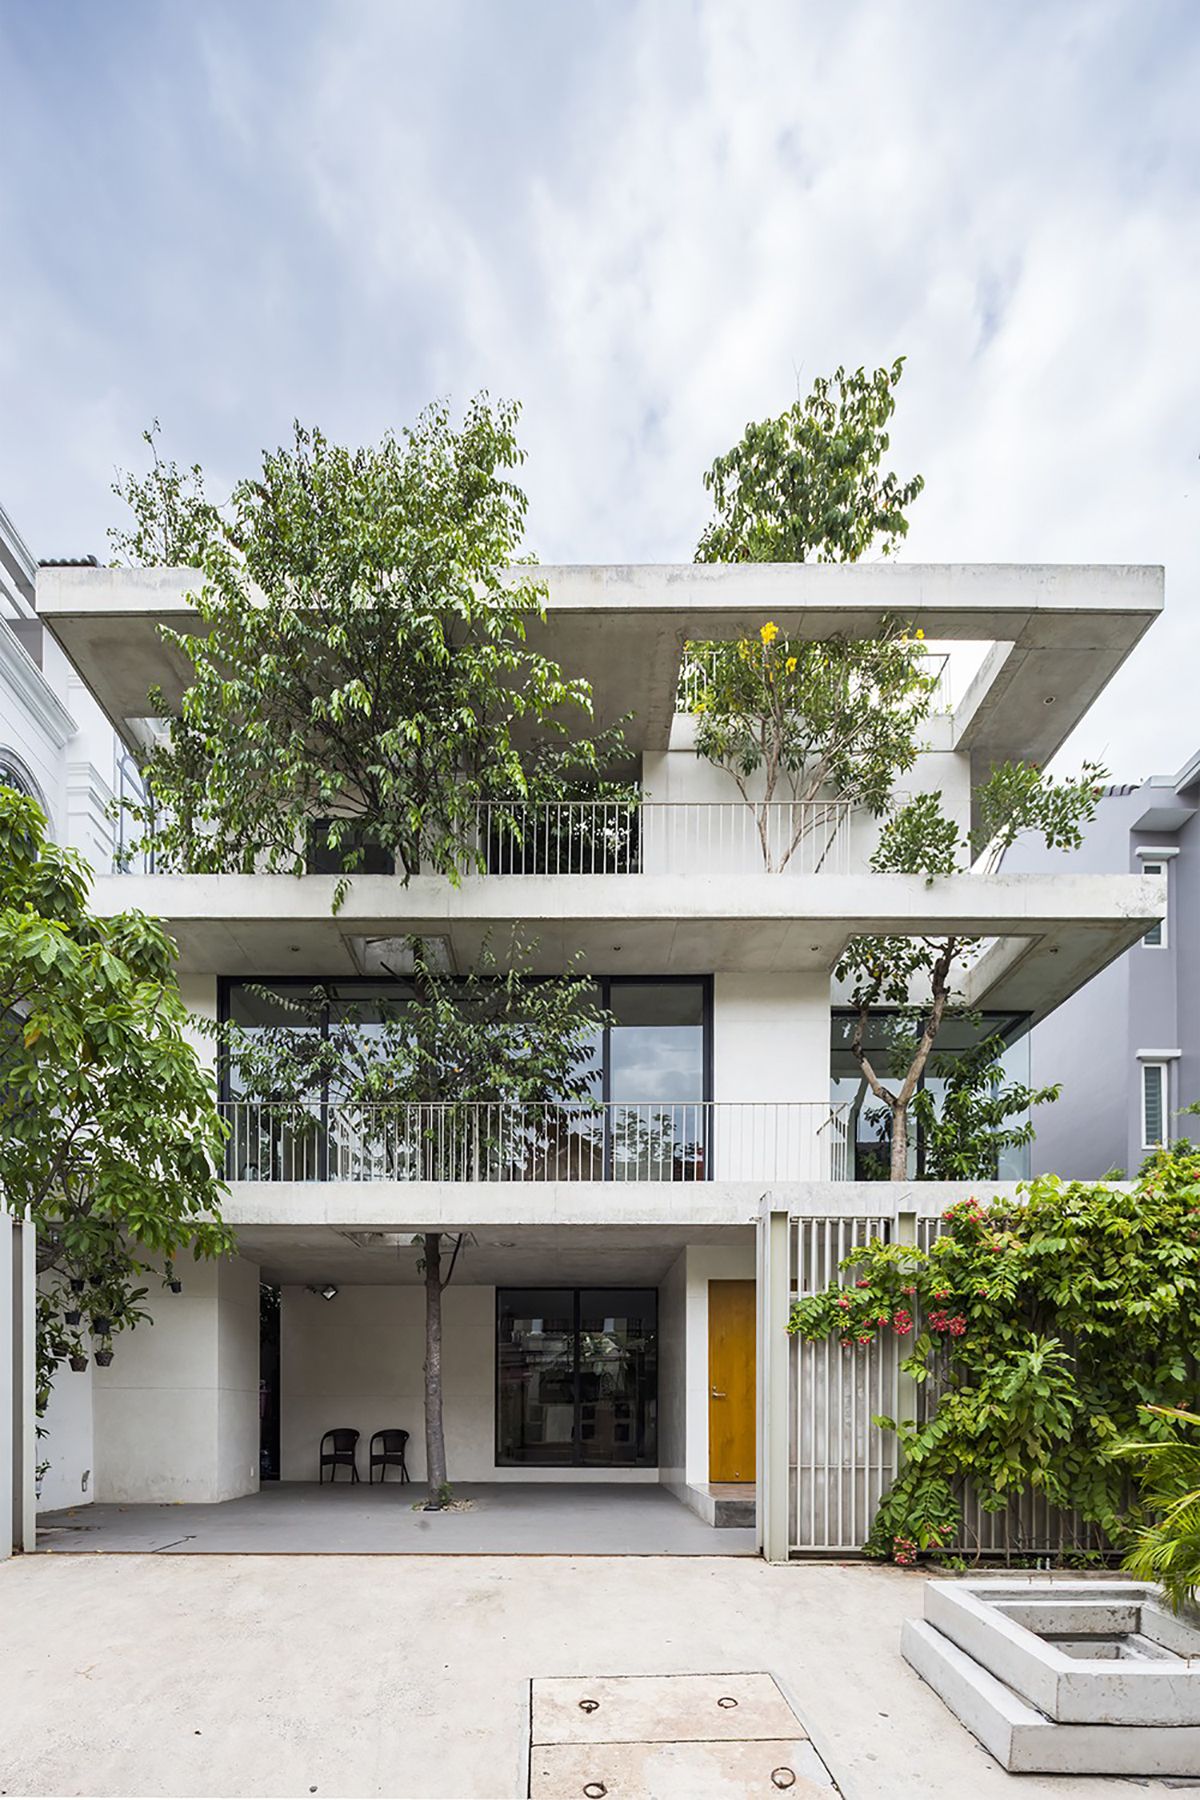 kienviet Truong Dai Hoc FPT Ha Noi va Stacked Planter House cua Vo Trong Nghia Architects VTN Architects gianh chien thang tai World Architecture Awards lan thu 42 14 1